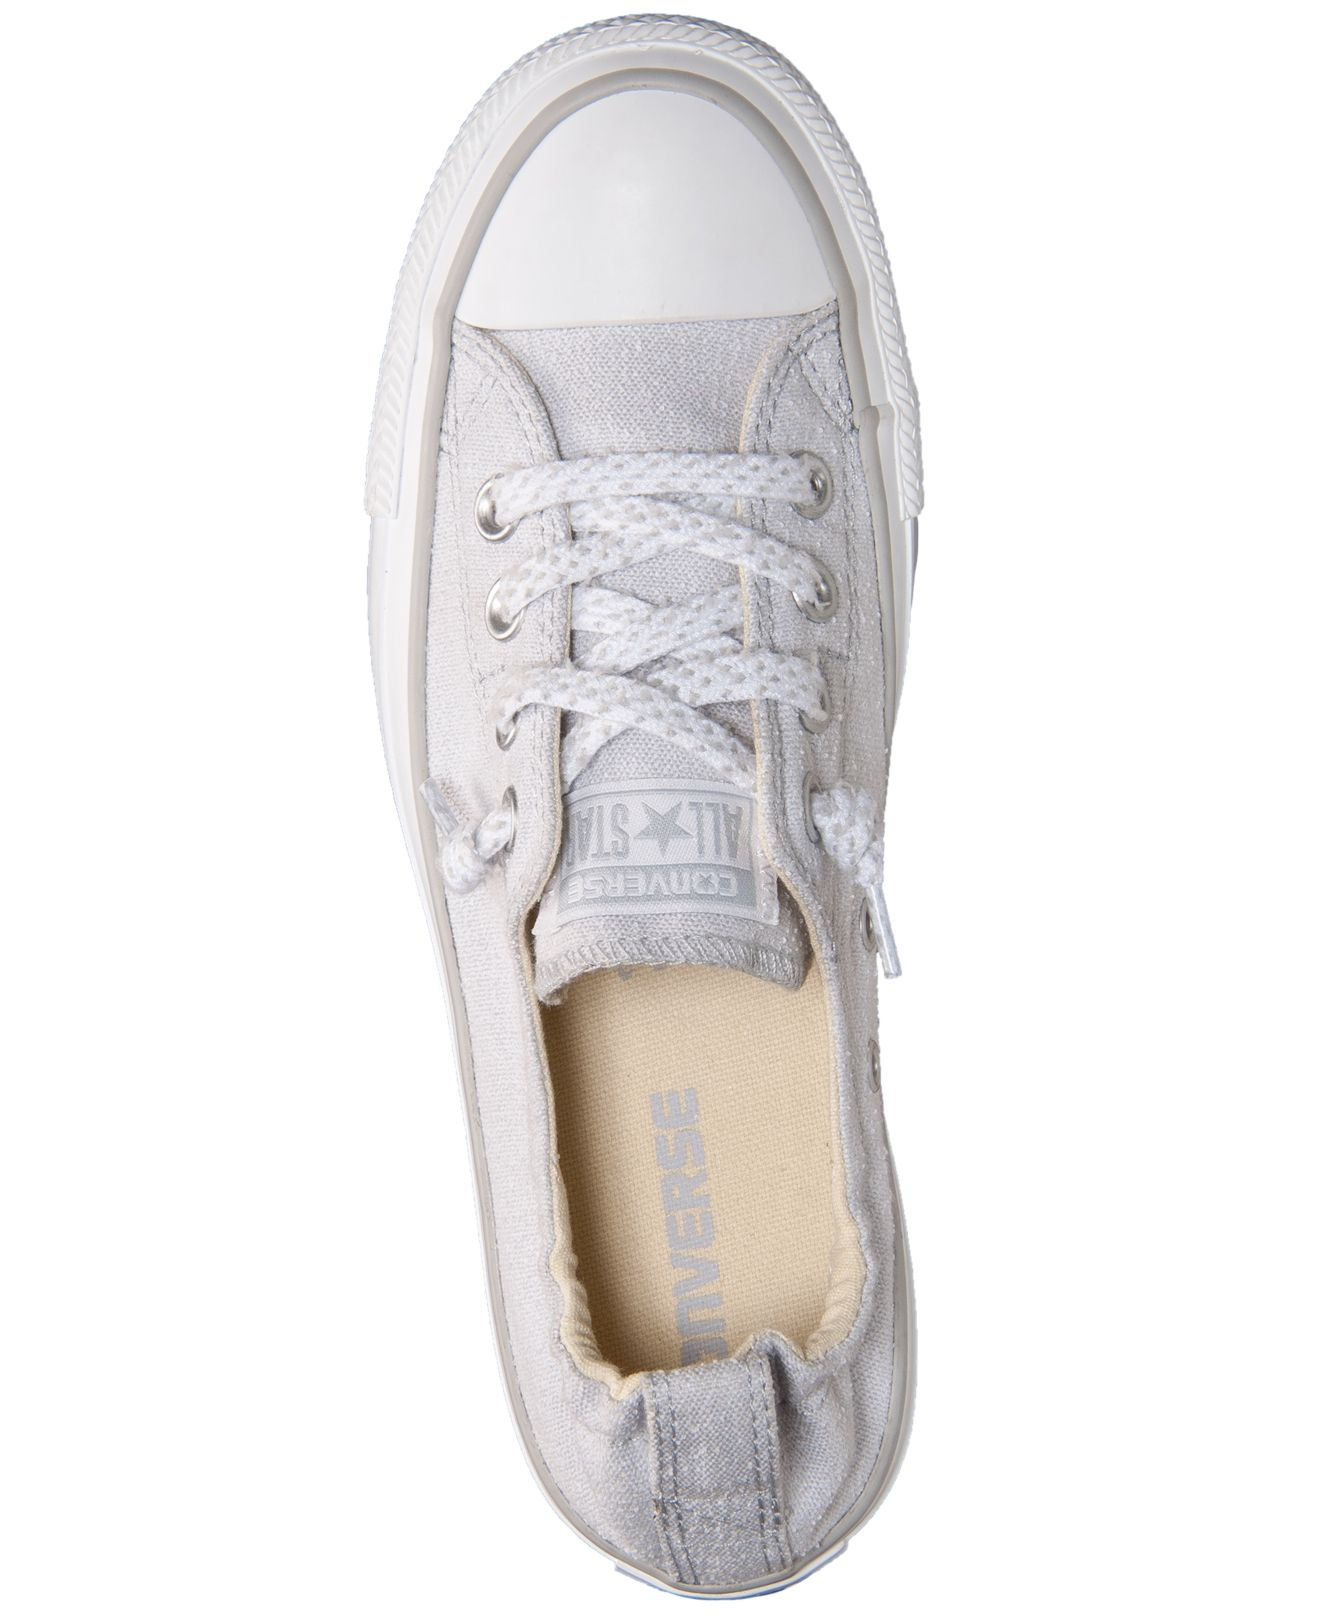 Converse Women'S Chuck Taylor Shoreline Slub Linen Casual Sneakers From Finish  Line in Natural | Lyst